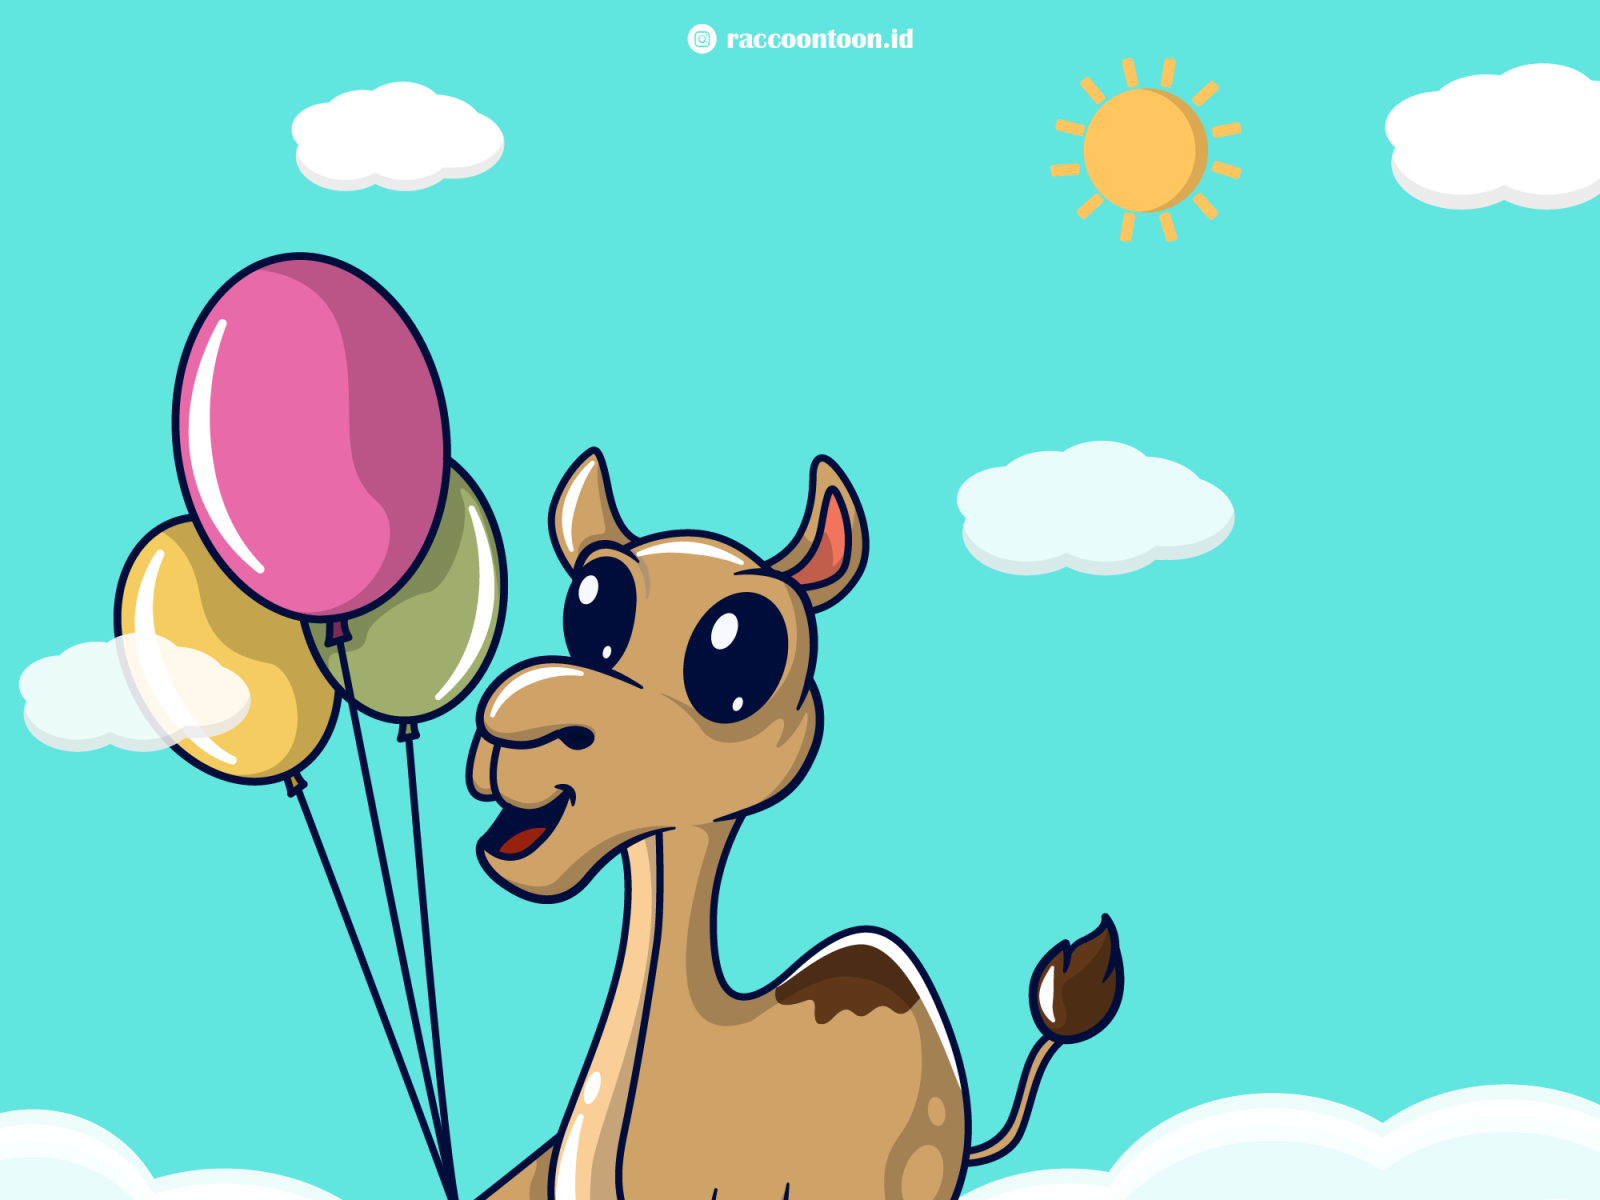 Cute Camel Illustration by RaccoonToon on Dribbble